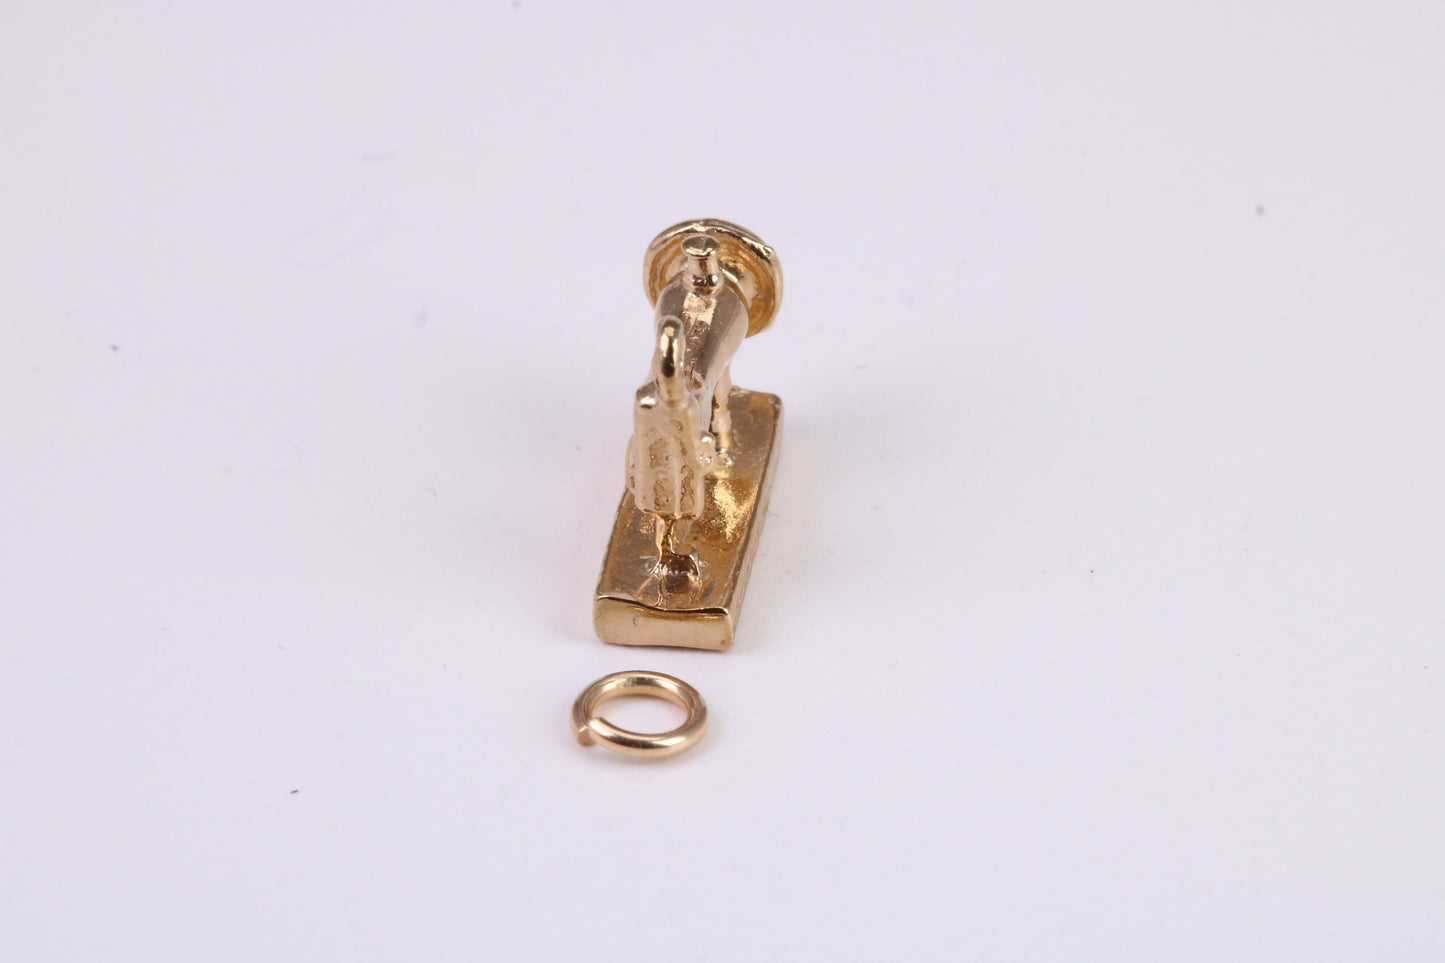 Sewing Machine Charm, Traditional Charm, Made From Solid Yellow Gold with British Hallmark, Complete with Attachment Link